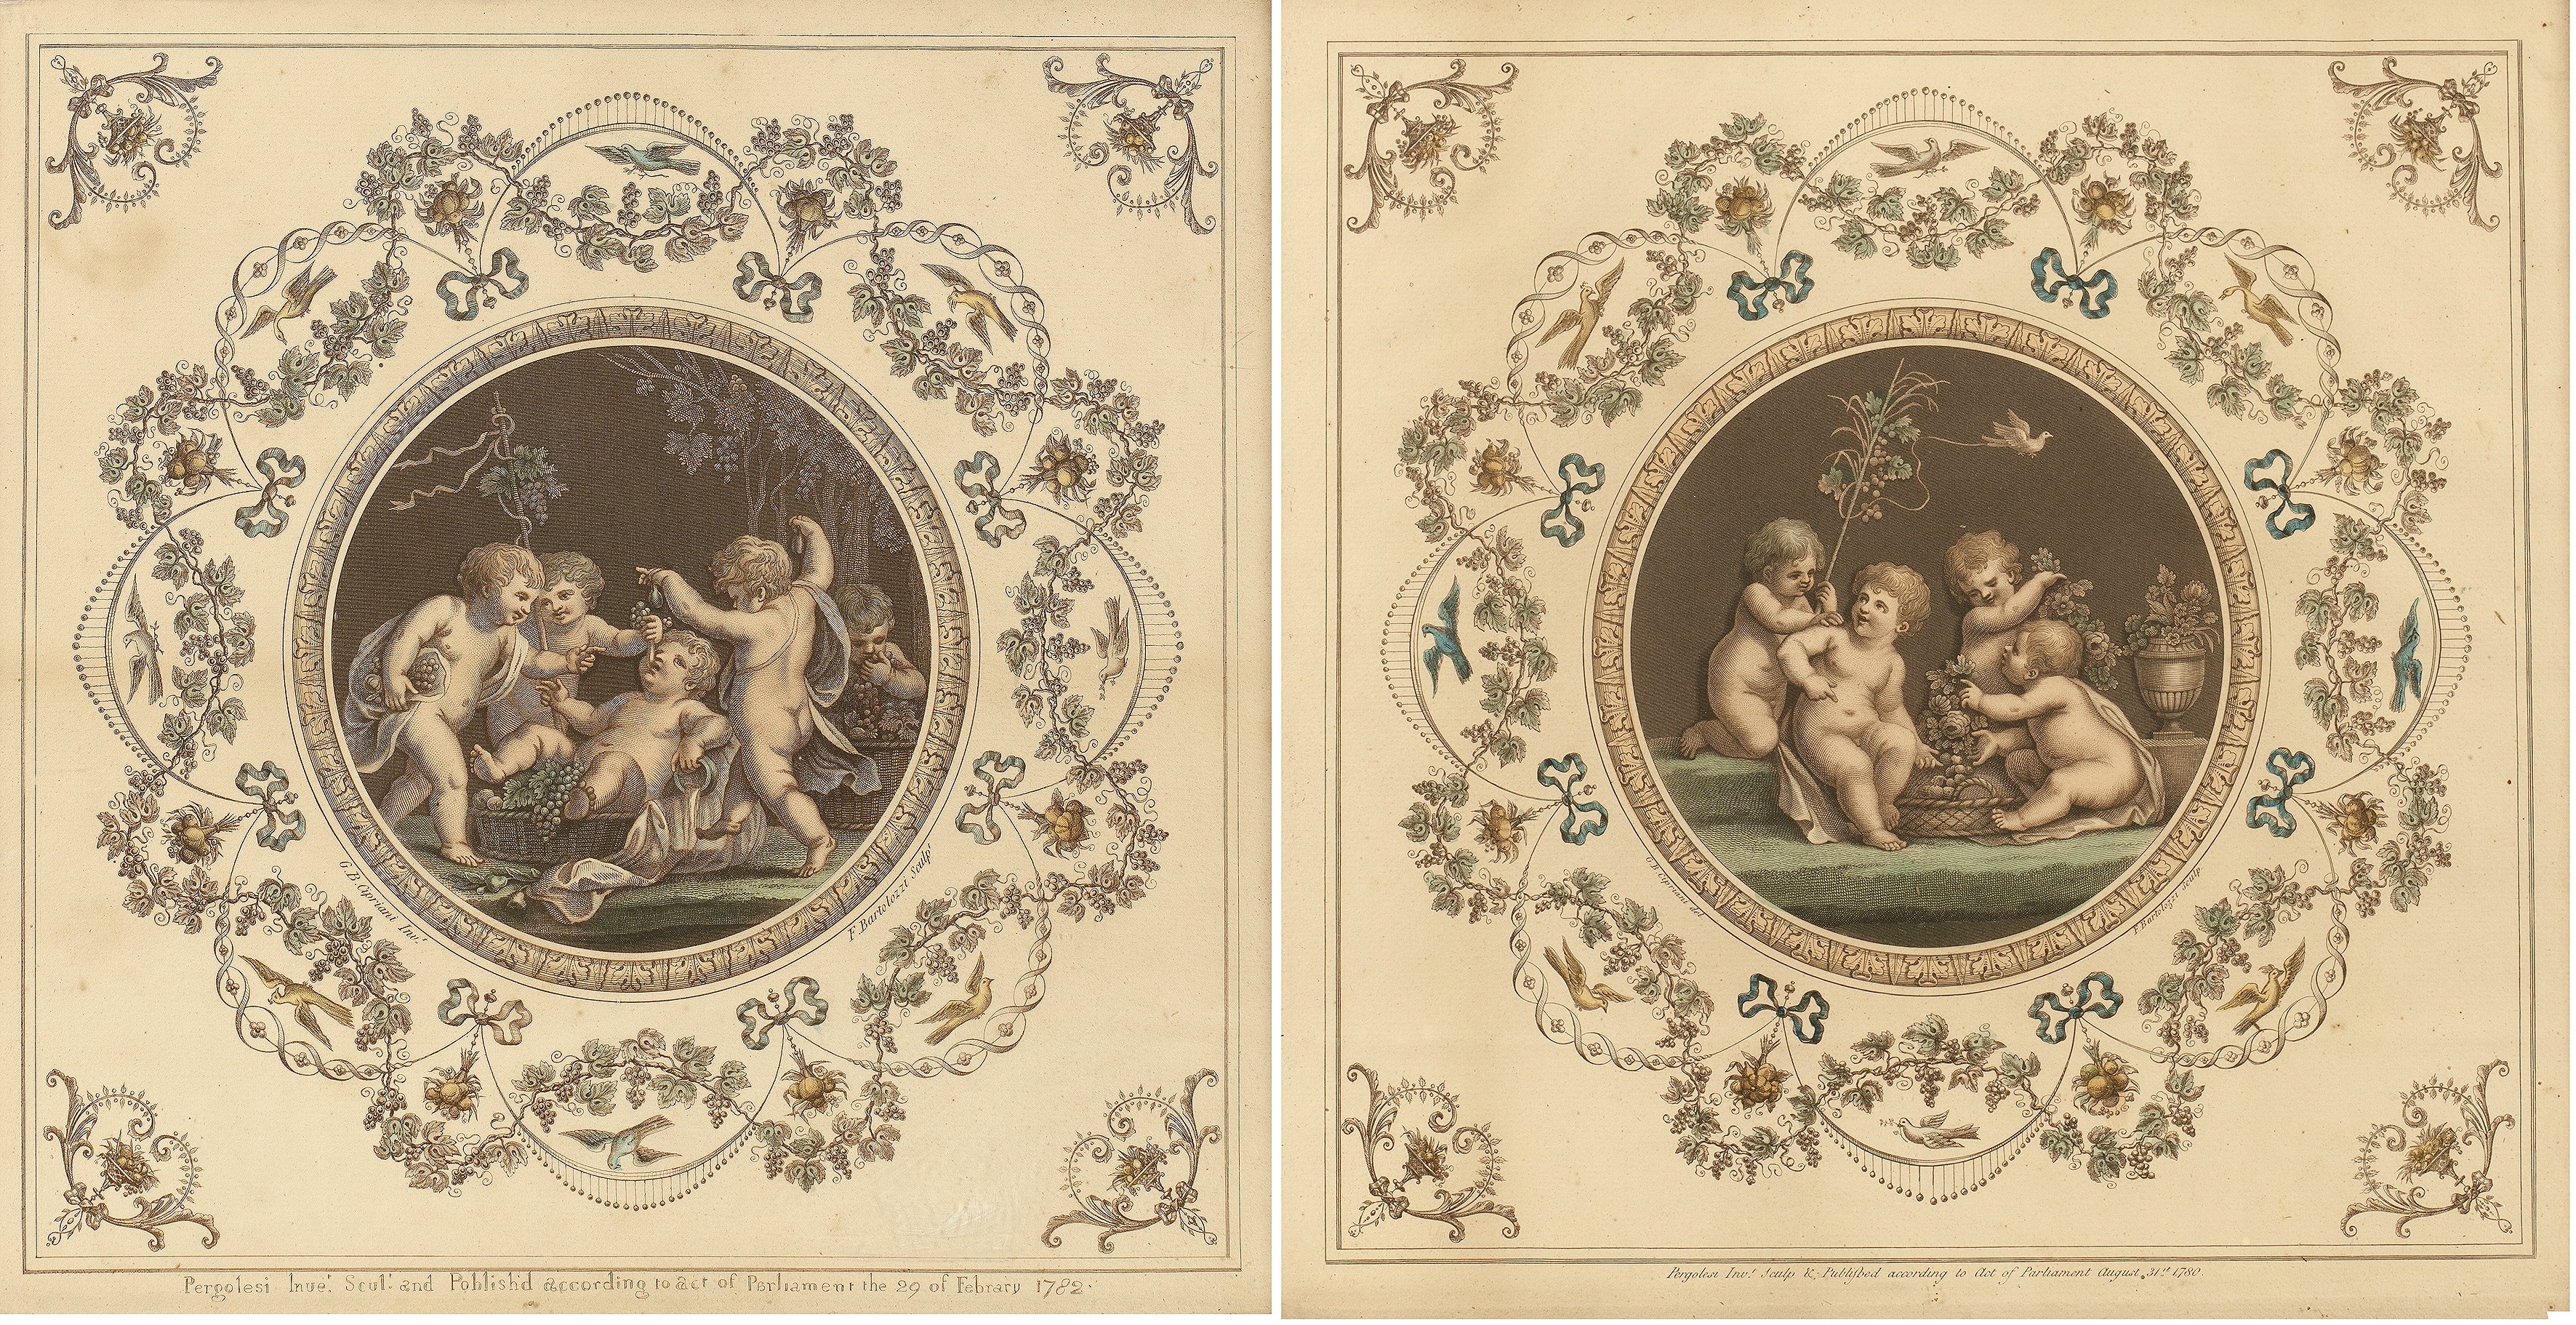 Artwork by Francesco Bartolozzi, Giovanni Battista Cipriani, Putti revelling with grapes, Made of etching in sepia with  hand-colouring